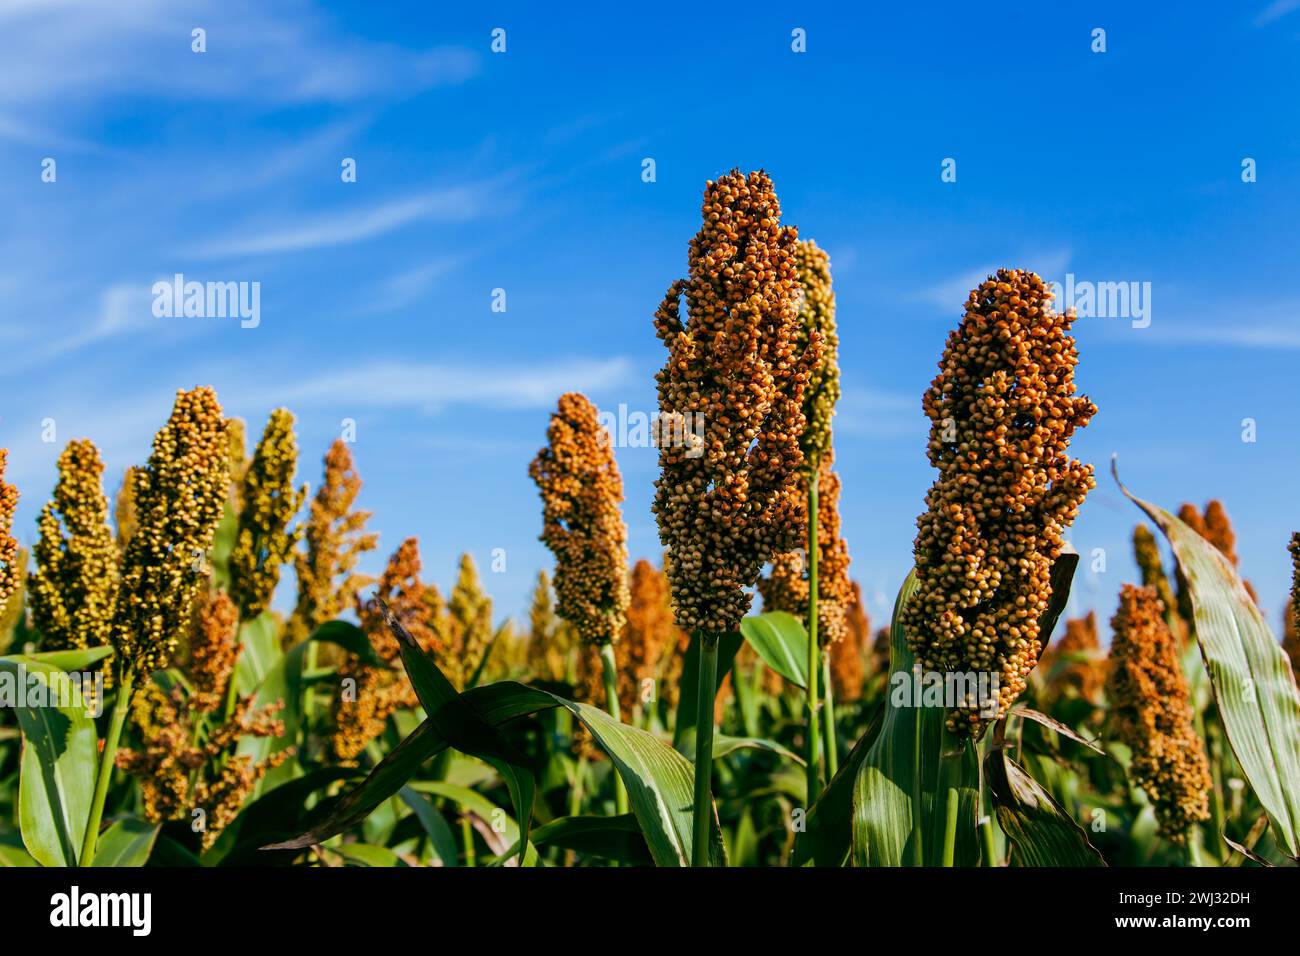 Biofuel and new boom Food, Sorghum Plantation industry. Field of Sweet Sorghum stalk and seeds. Mill Stock Photo